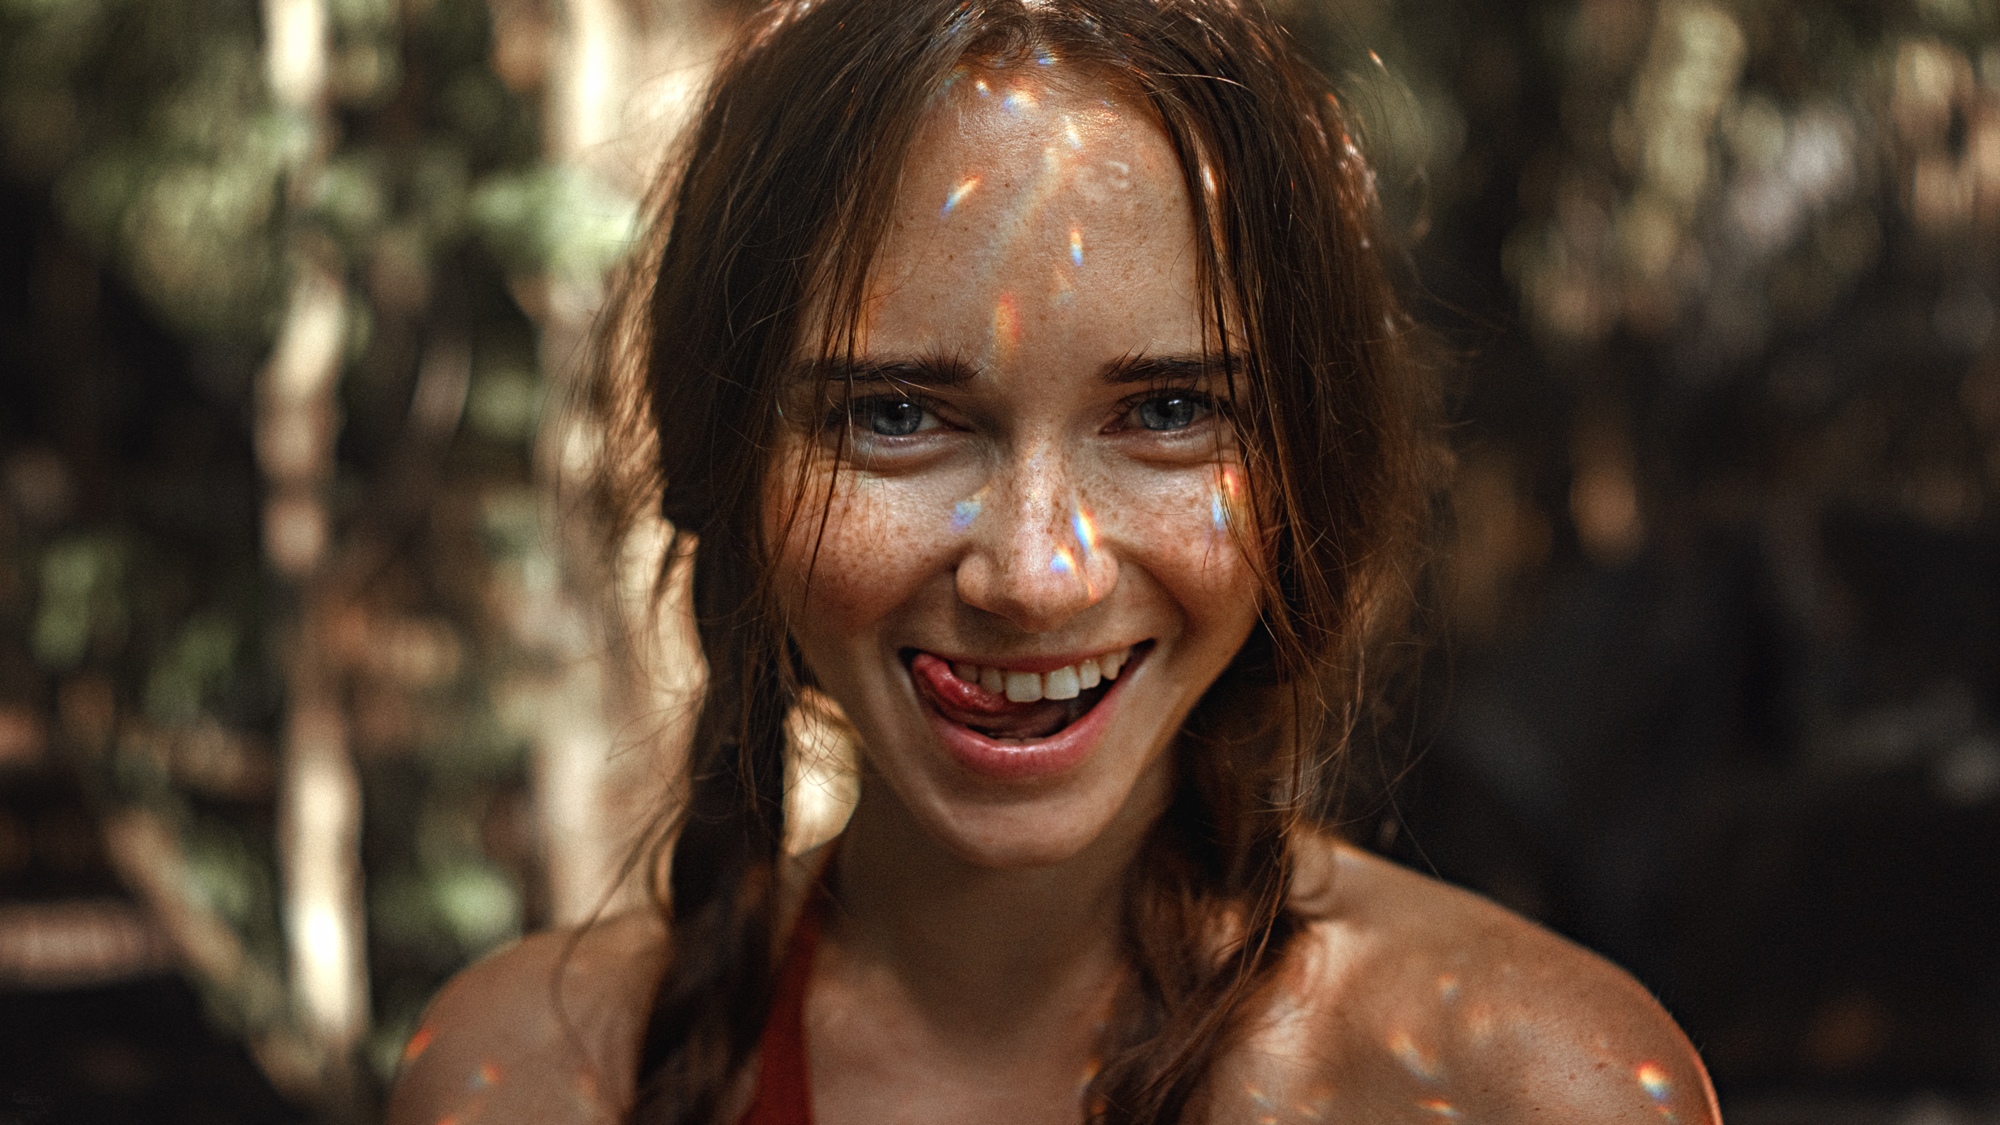 People 2000x1125 women model face women outdoors tongue out smiling freckles looking at viewer Georgy Chernyadyev Anastasia Nelen depth of field closeup teeth licking lips blue eyes brunette braids twintails bare shoulders portrait